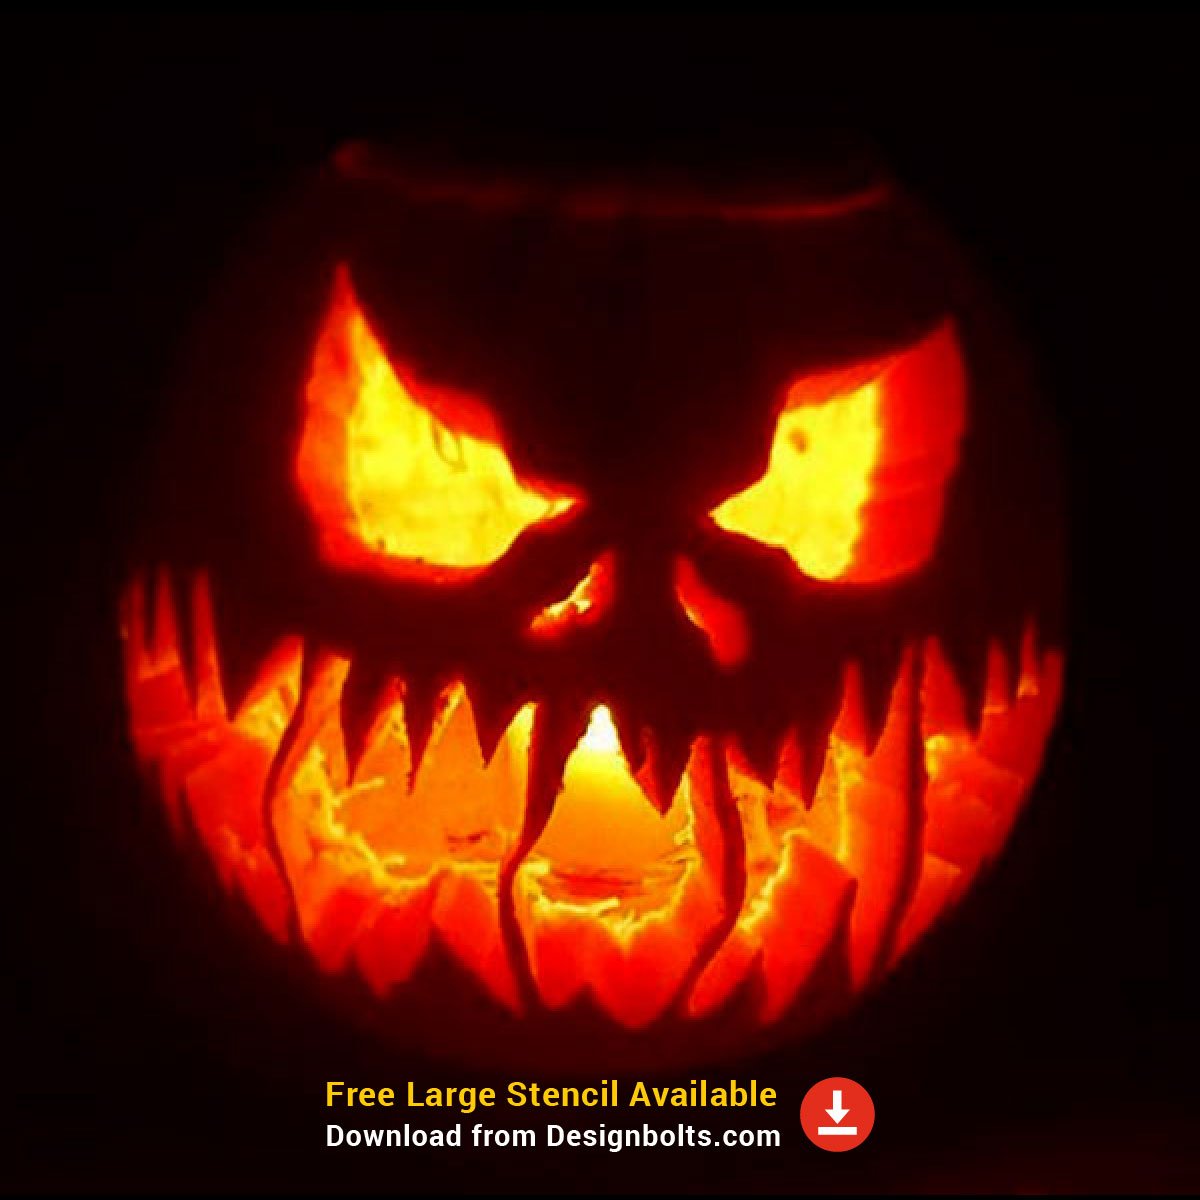 25 SELECTED | Best Creative & Scary Pumpkin Carving Ideas 2019 ...